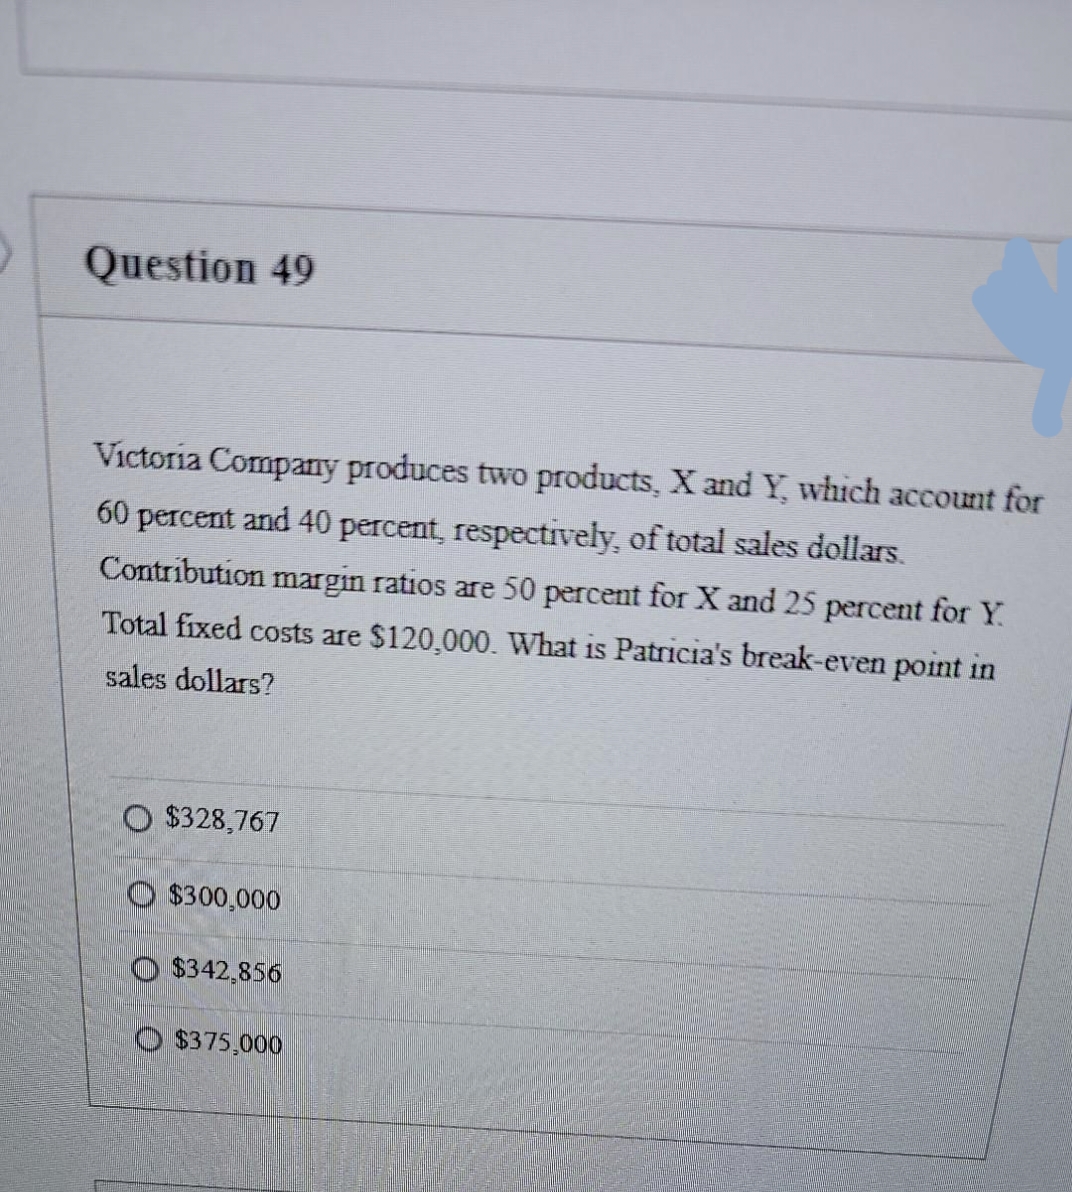 Question 49
Victoria Company produces two products, X and Y, which account for
60 percent and 40 percent, respectively, of total sales dollars.
Contribution margin ratios are 50 percent for X and 25 percent for Y.
Total fixed costs are $120,000. What is Patricia's break-even point in
sales dollars?
O $328,767
O$300,000
O $342,856
O $375,000
